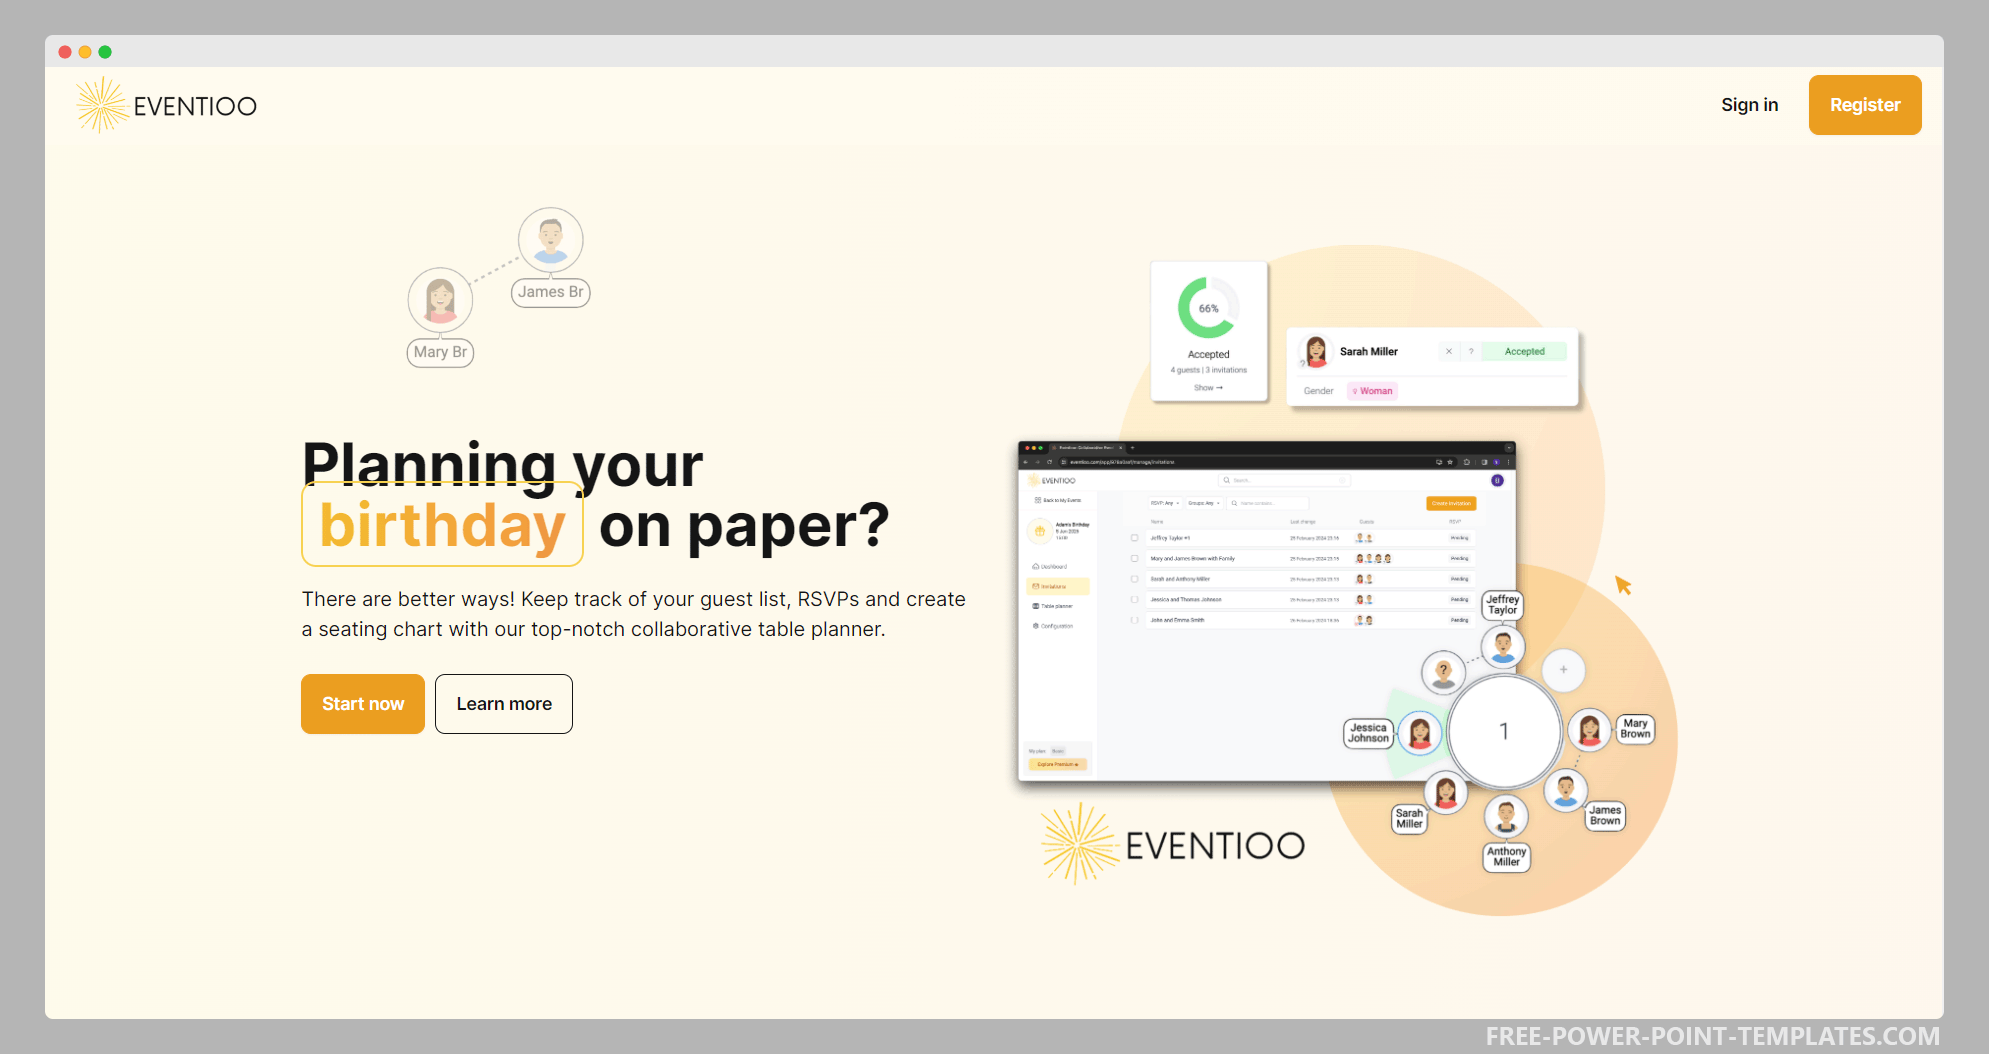 Eventioo: The Ultimate Collaborative Event Planning Tool